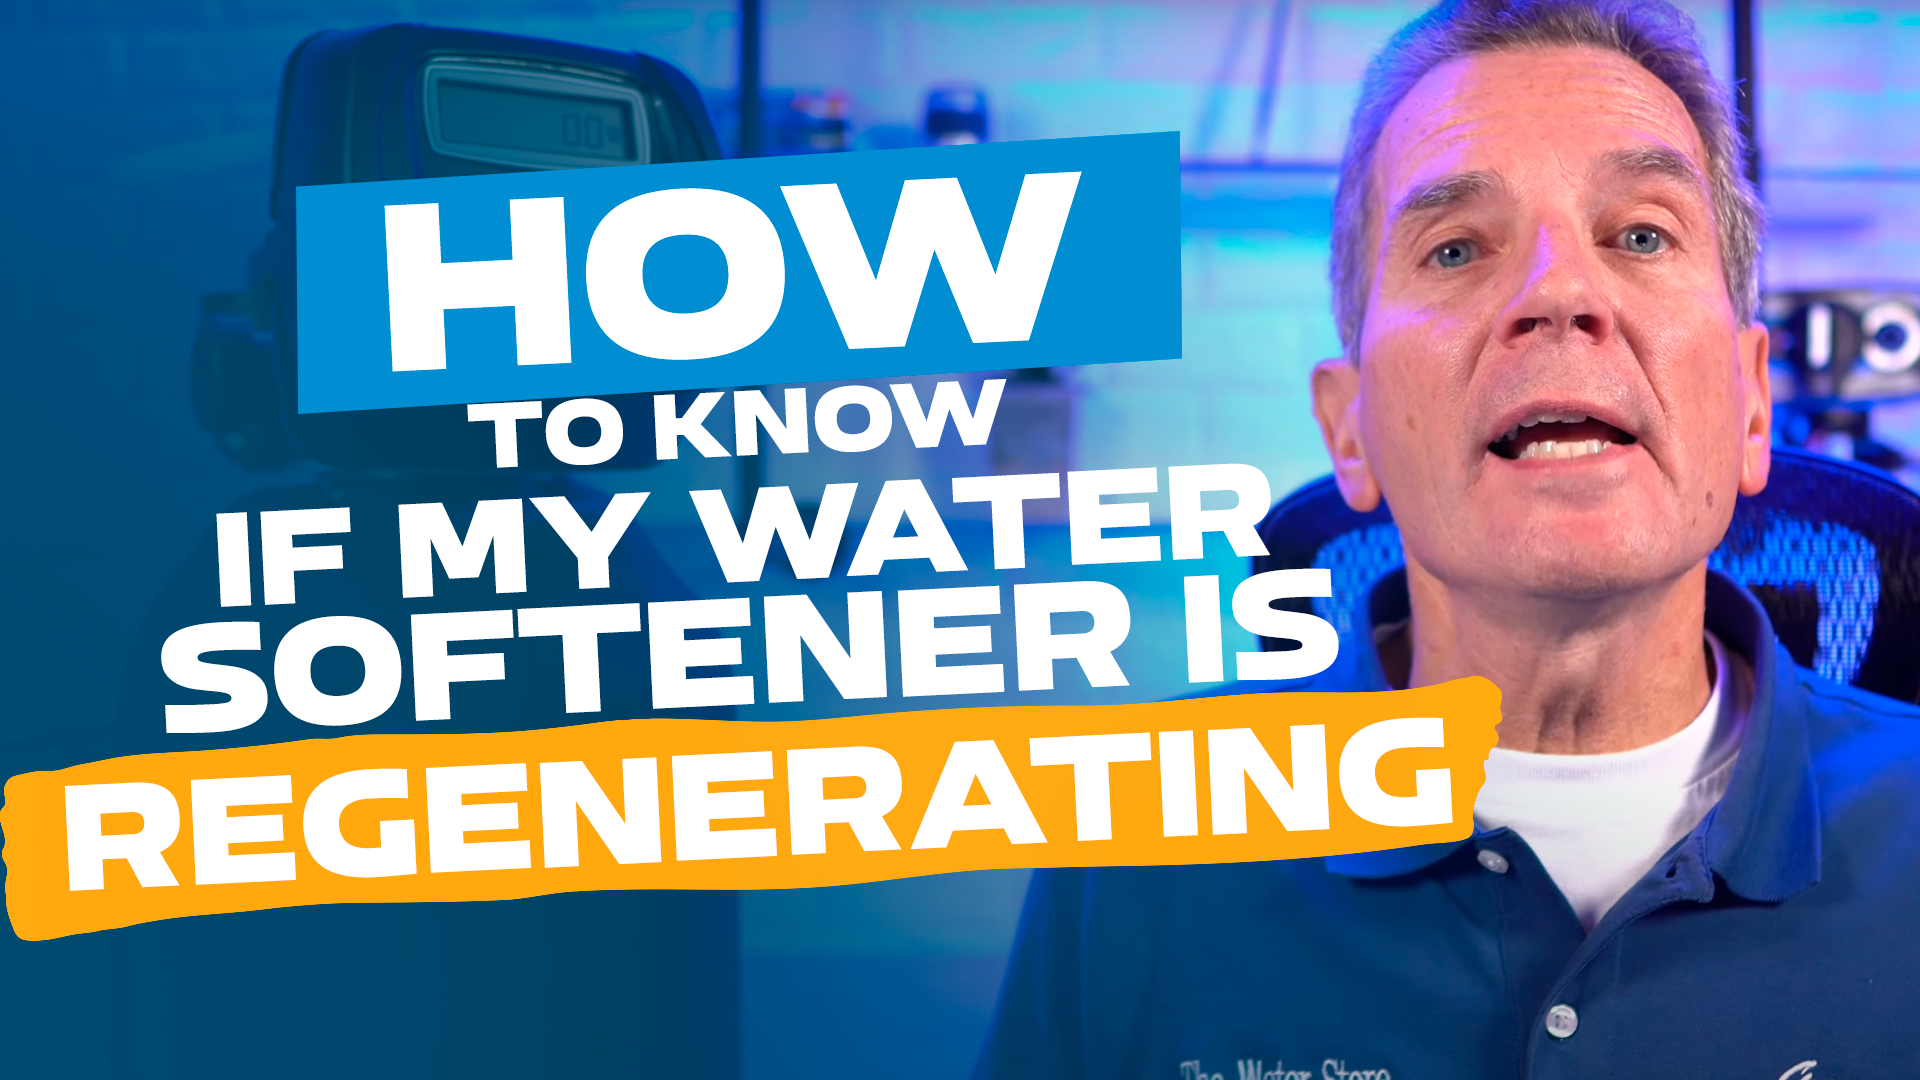 How Do I Know if My Water Softener Is Regenerating?